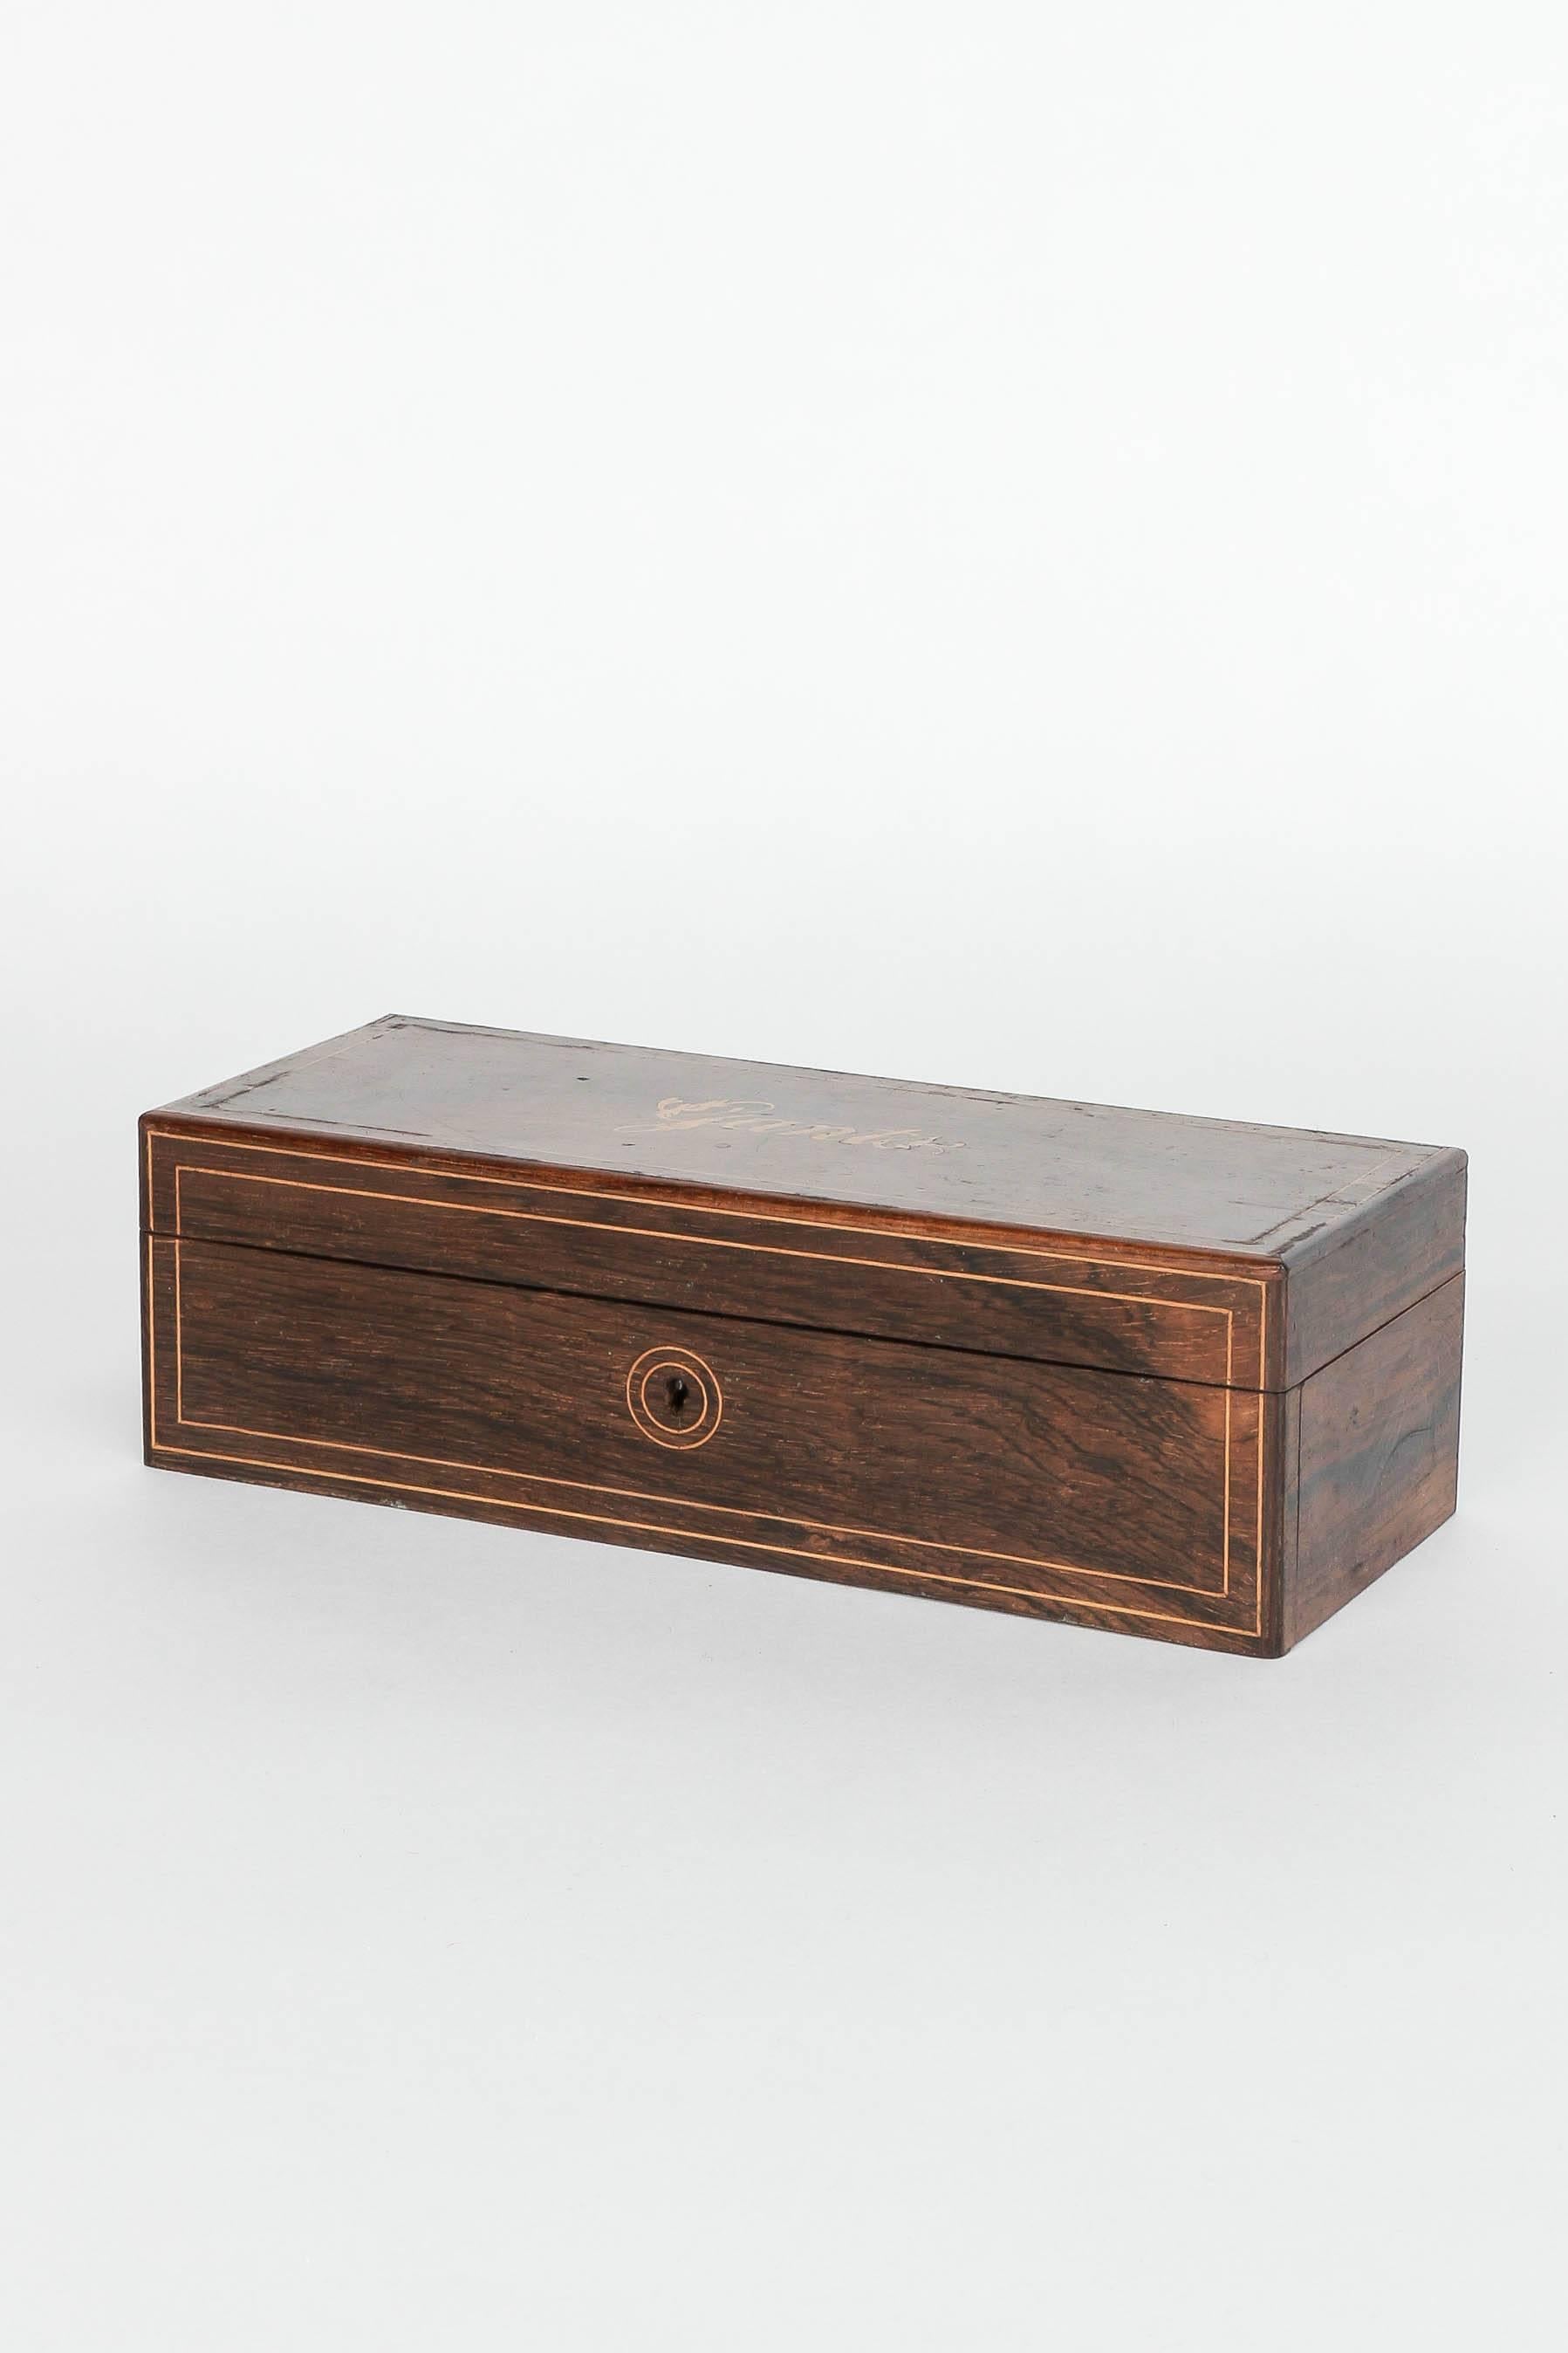 Incredible French glove box made of rosewood, interior is made of bird's-eye maple. Manufactured in France, circa 1870. Brass hinges and fine inlays made of lemon wood with the lettering 